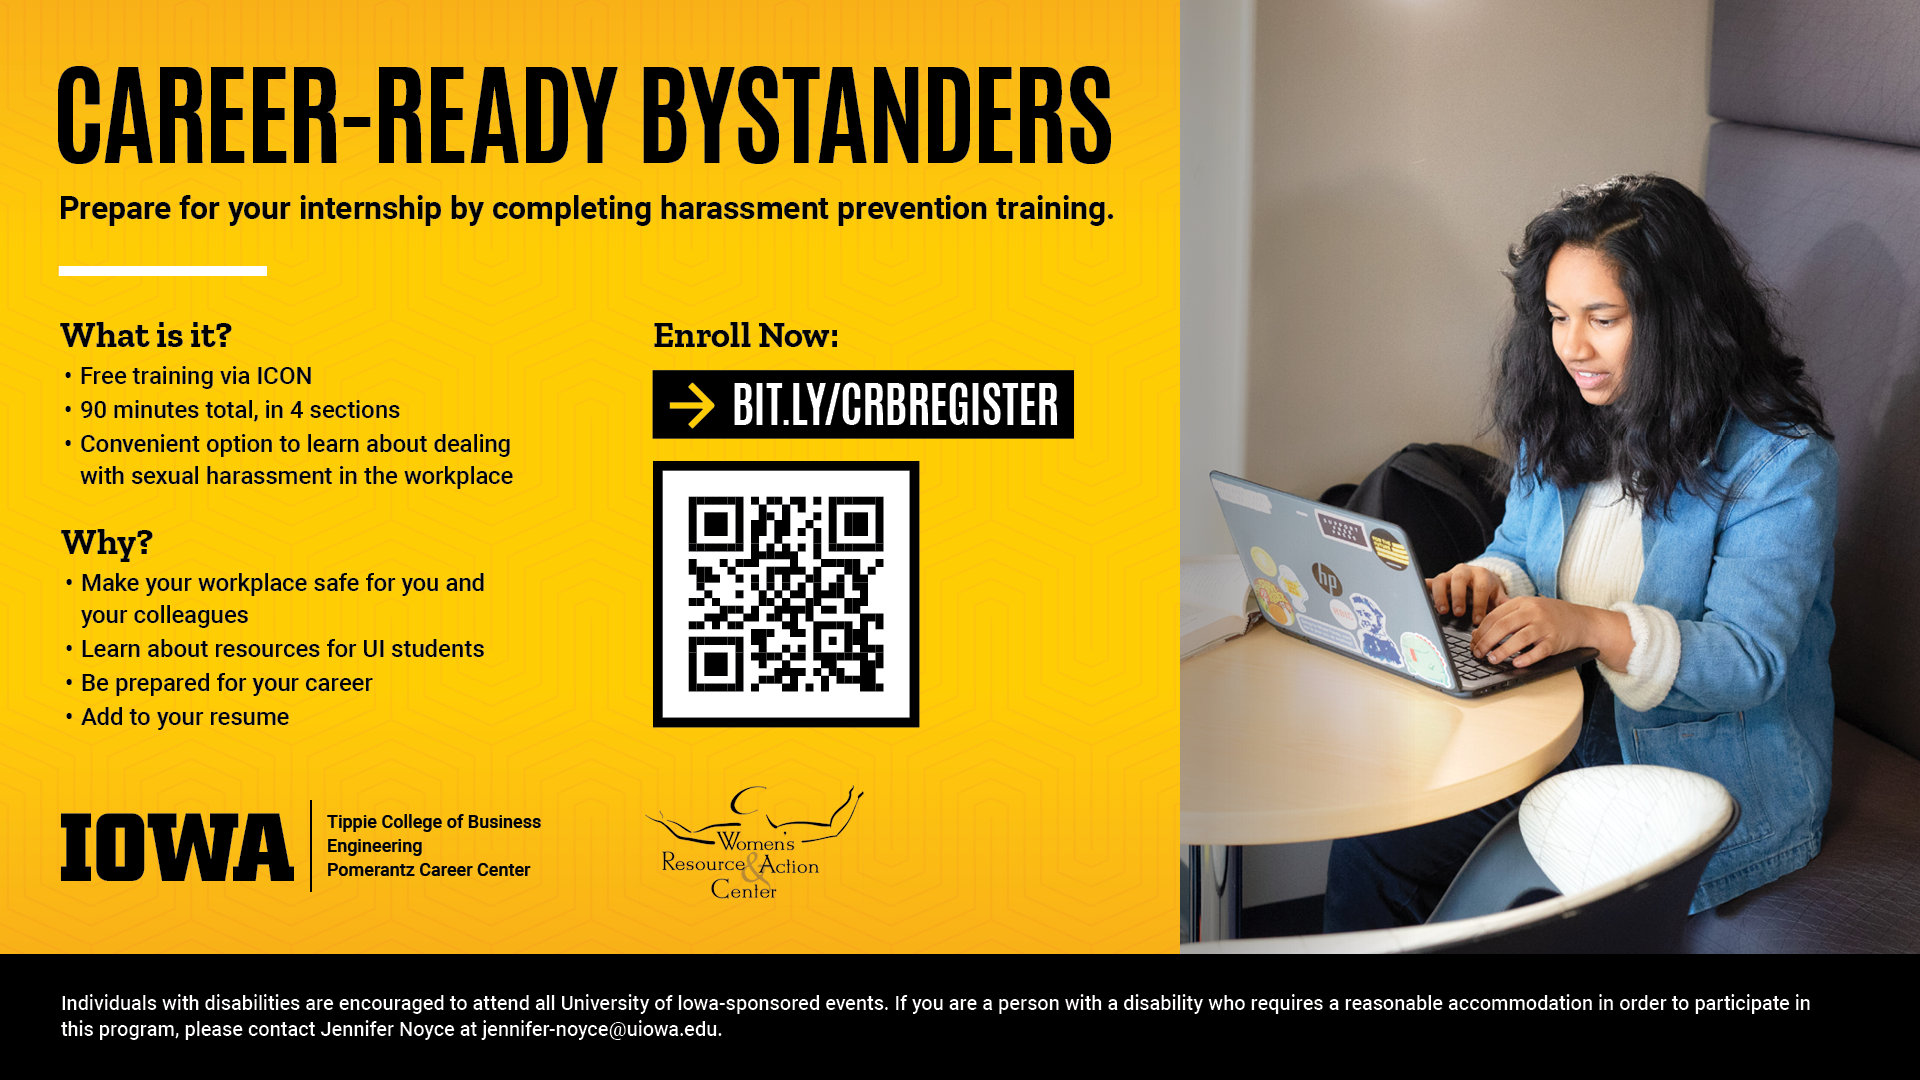 Career-Ready Bystanders: Enroll now at bit.ly/crbregister